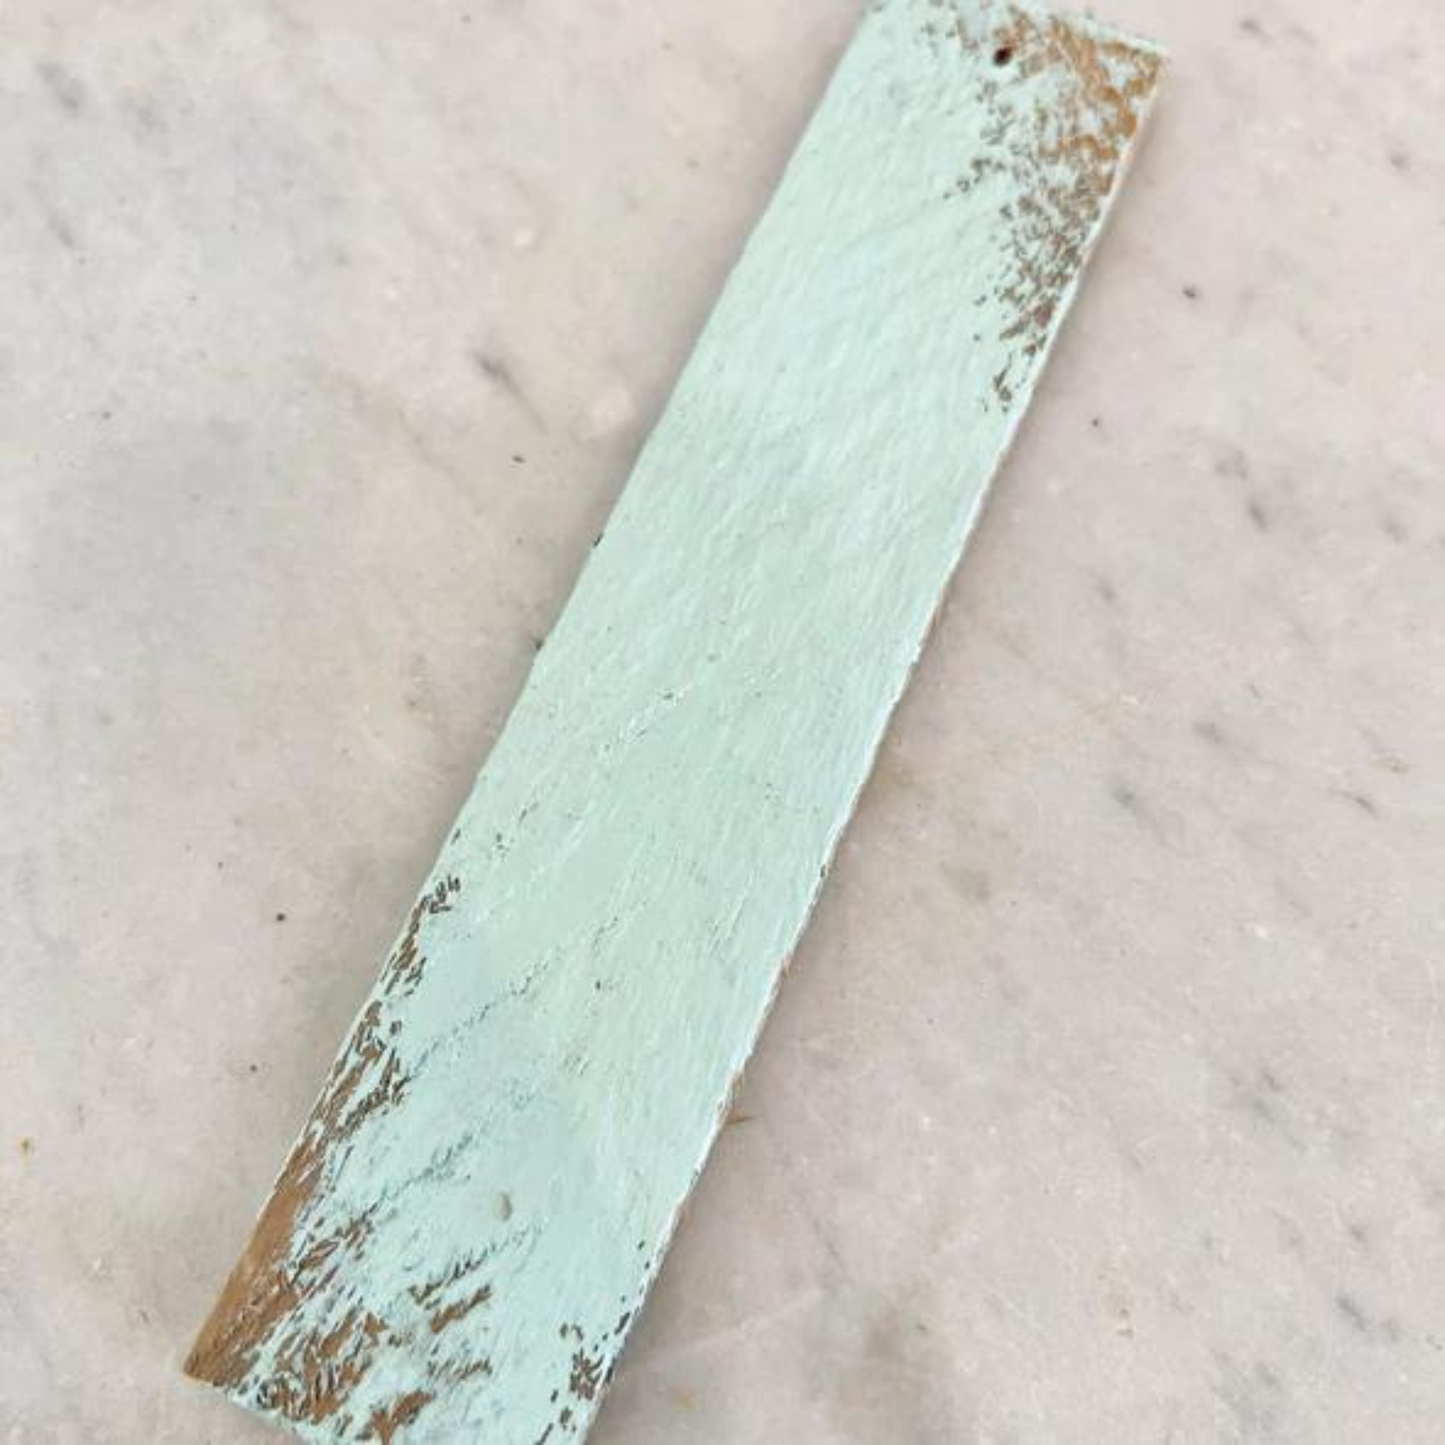 Painted plank example of Vintage Mint - DIY Cottage Color Paint curated by Jamie Ray Vintage. Available in pints at Milton's Daughter.